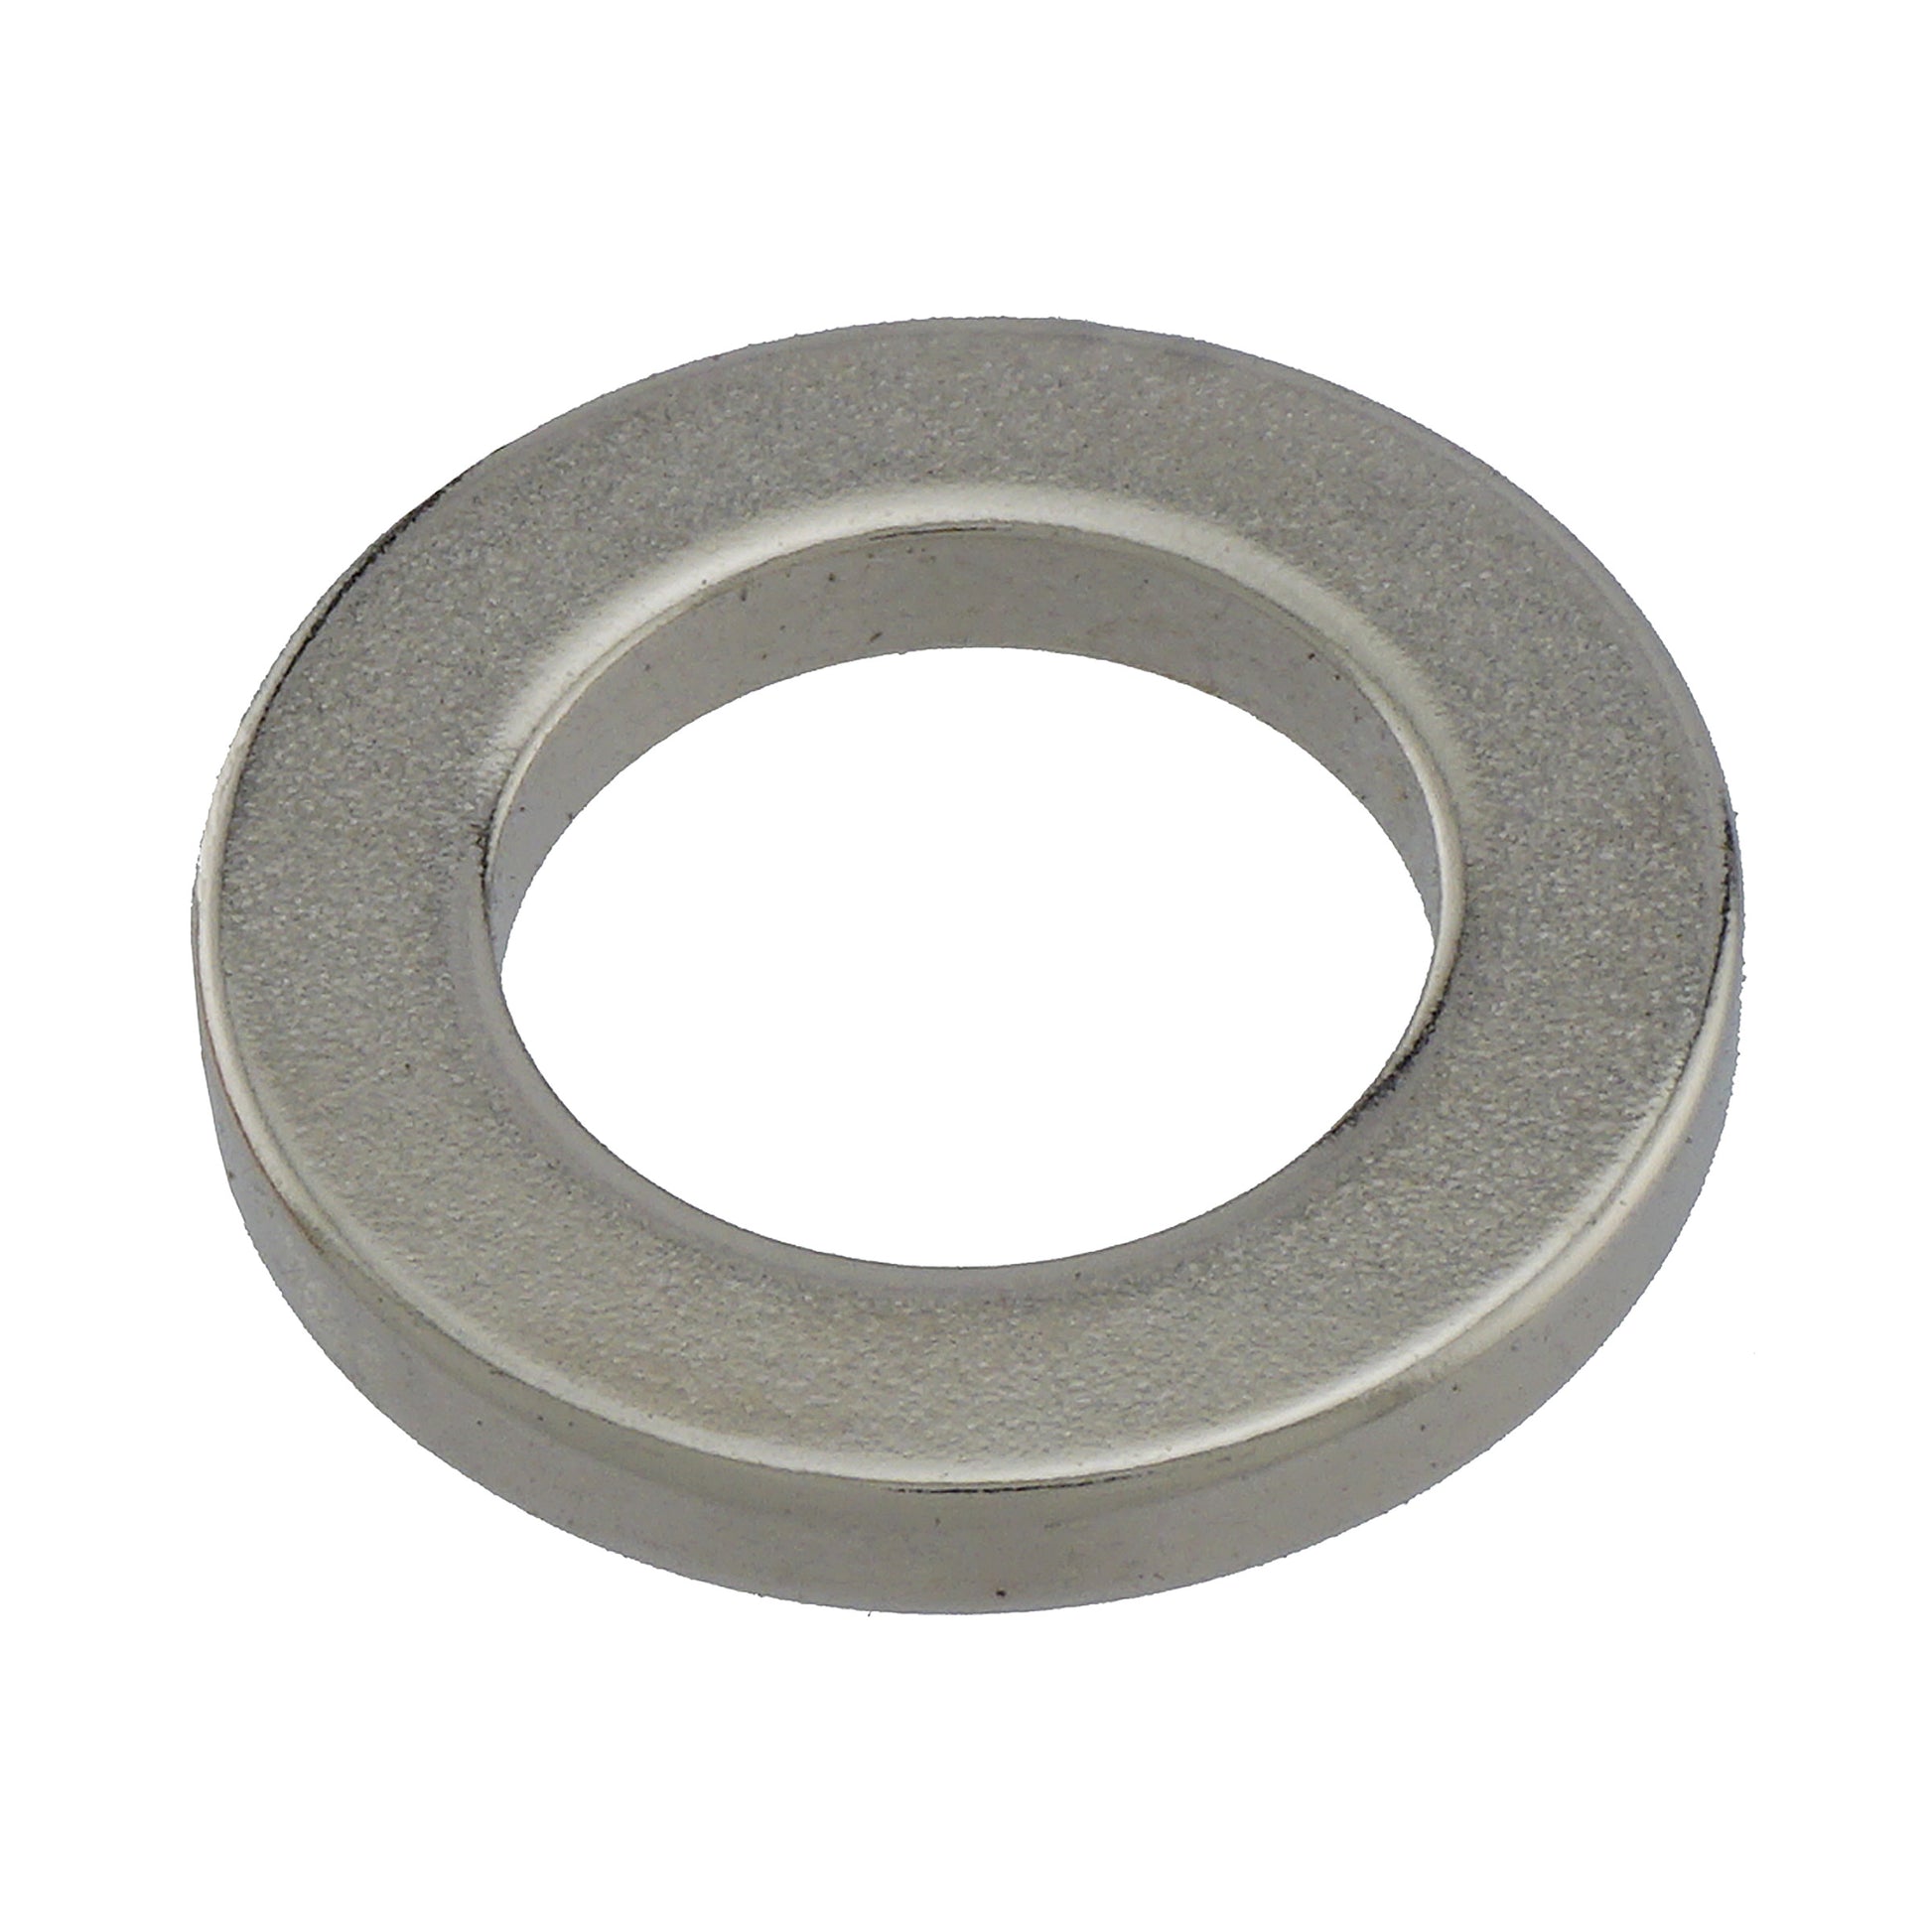 Load image into Gallery viewer, NR741N-35 Neodymium Ring Magnet - 45 Degree Angle View